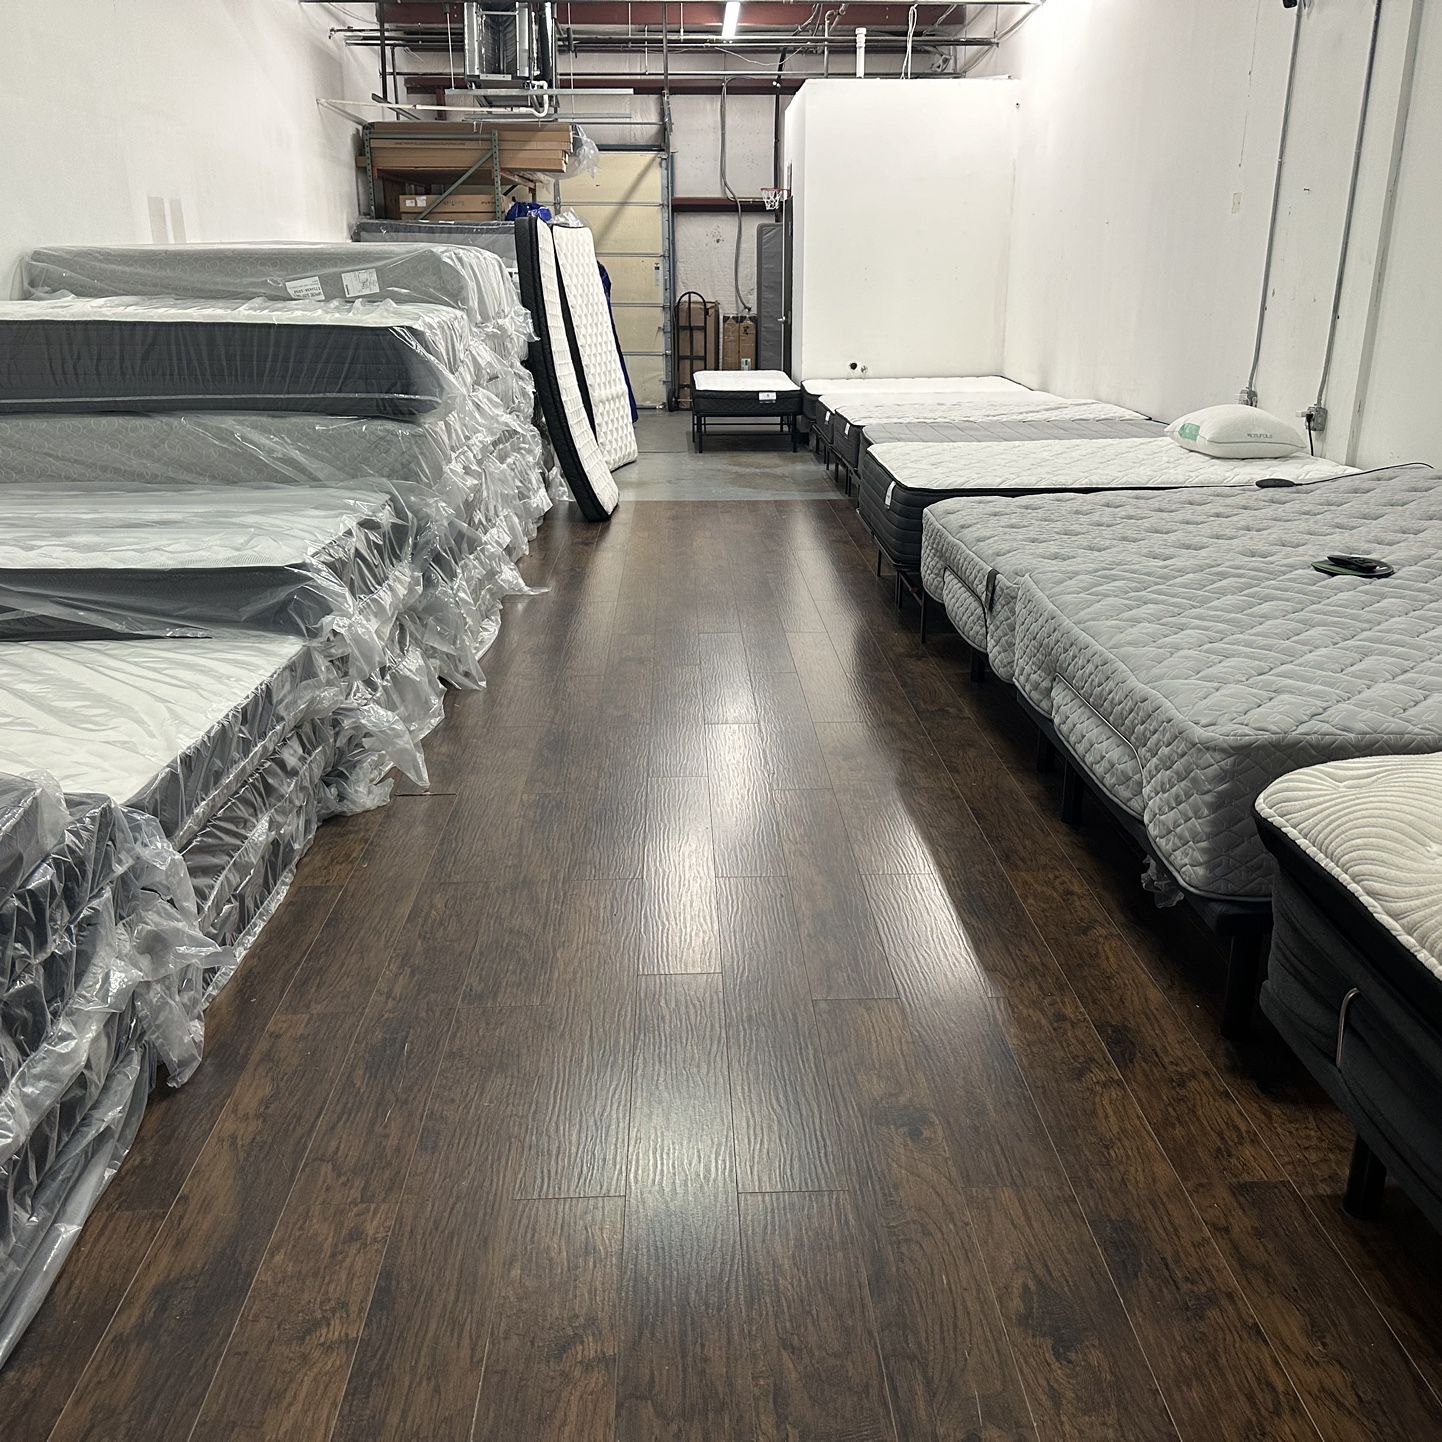 All Mattresses! All Styles! Clearing Them Out Today!